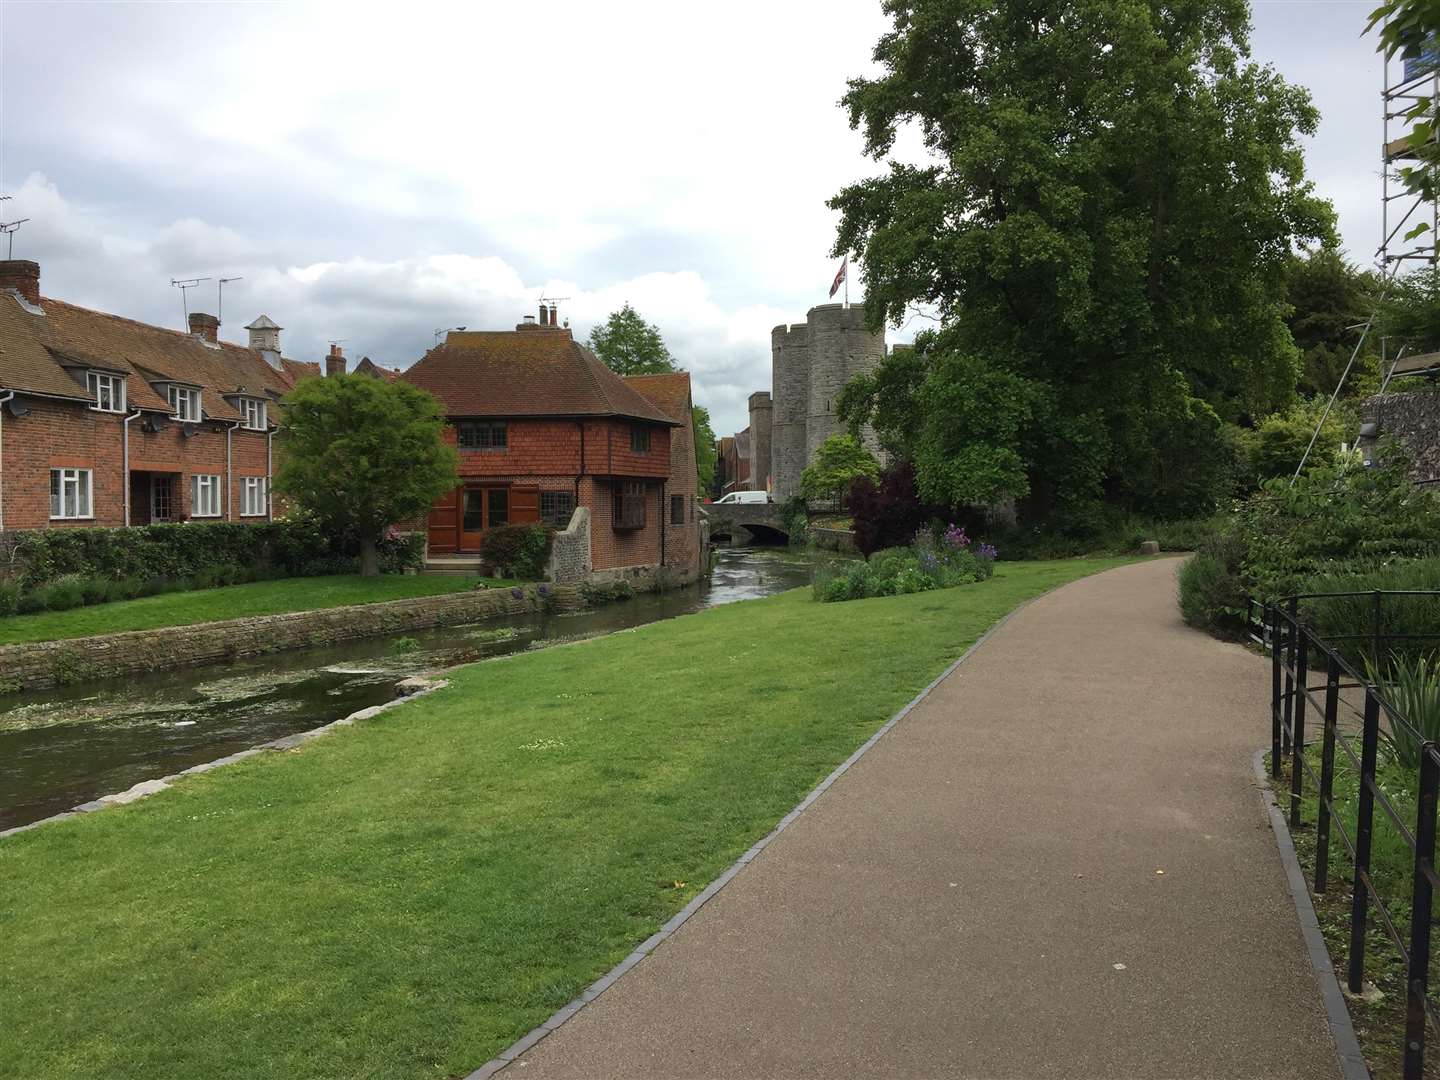 The incident happened in Westgate Gardens, Canterbury